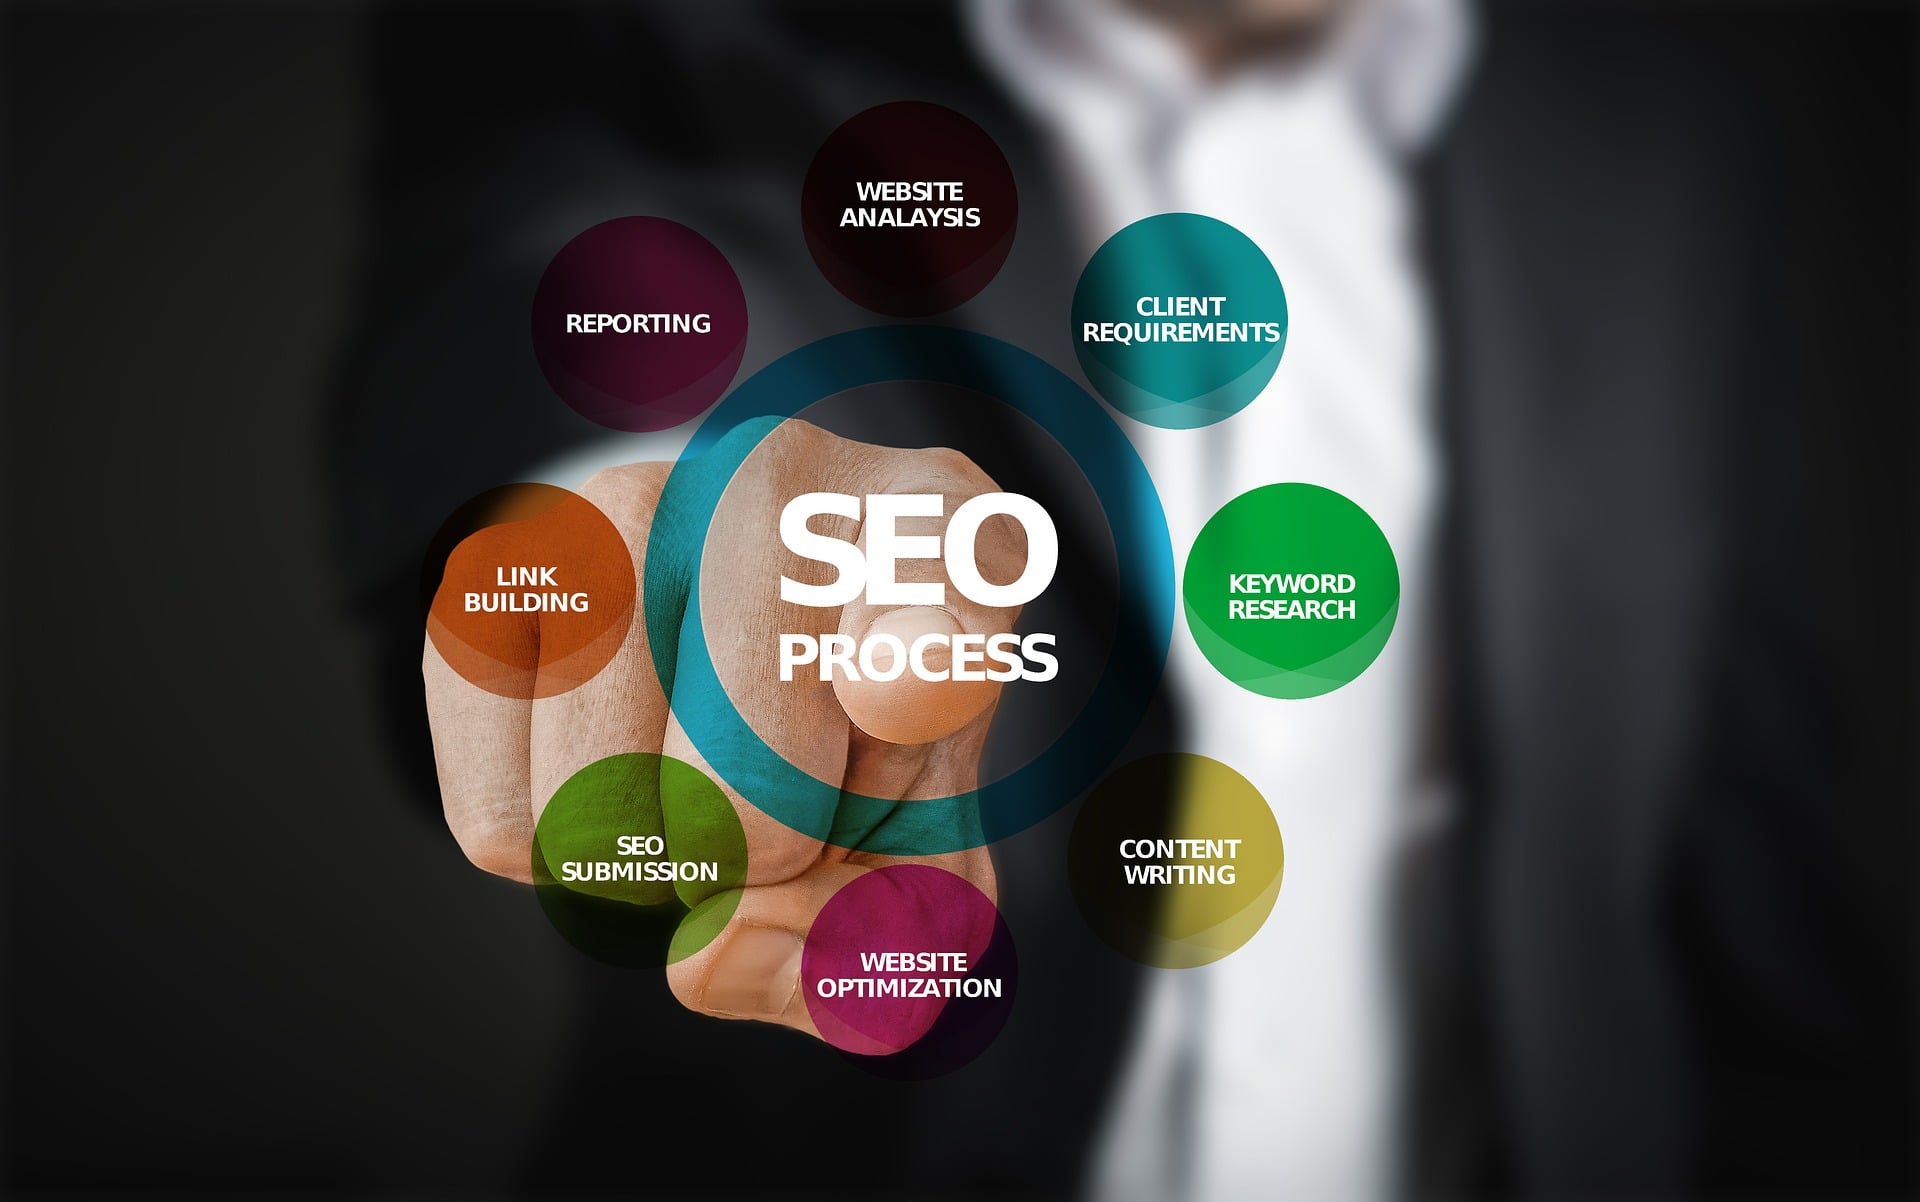 Business SEO Services